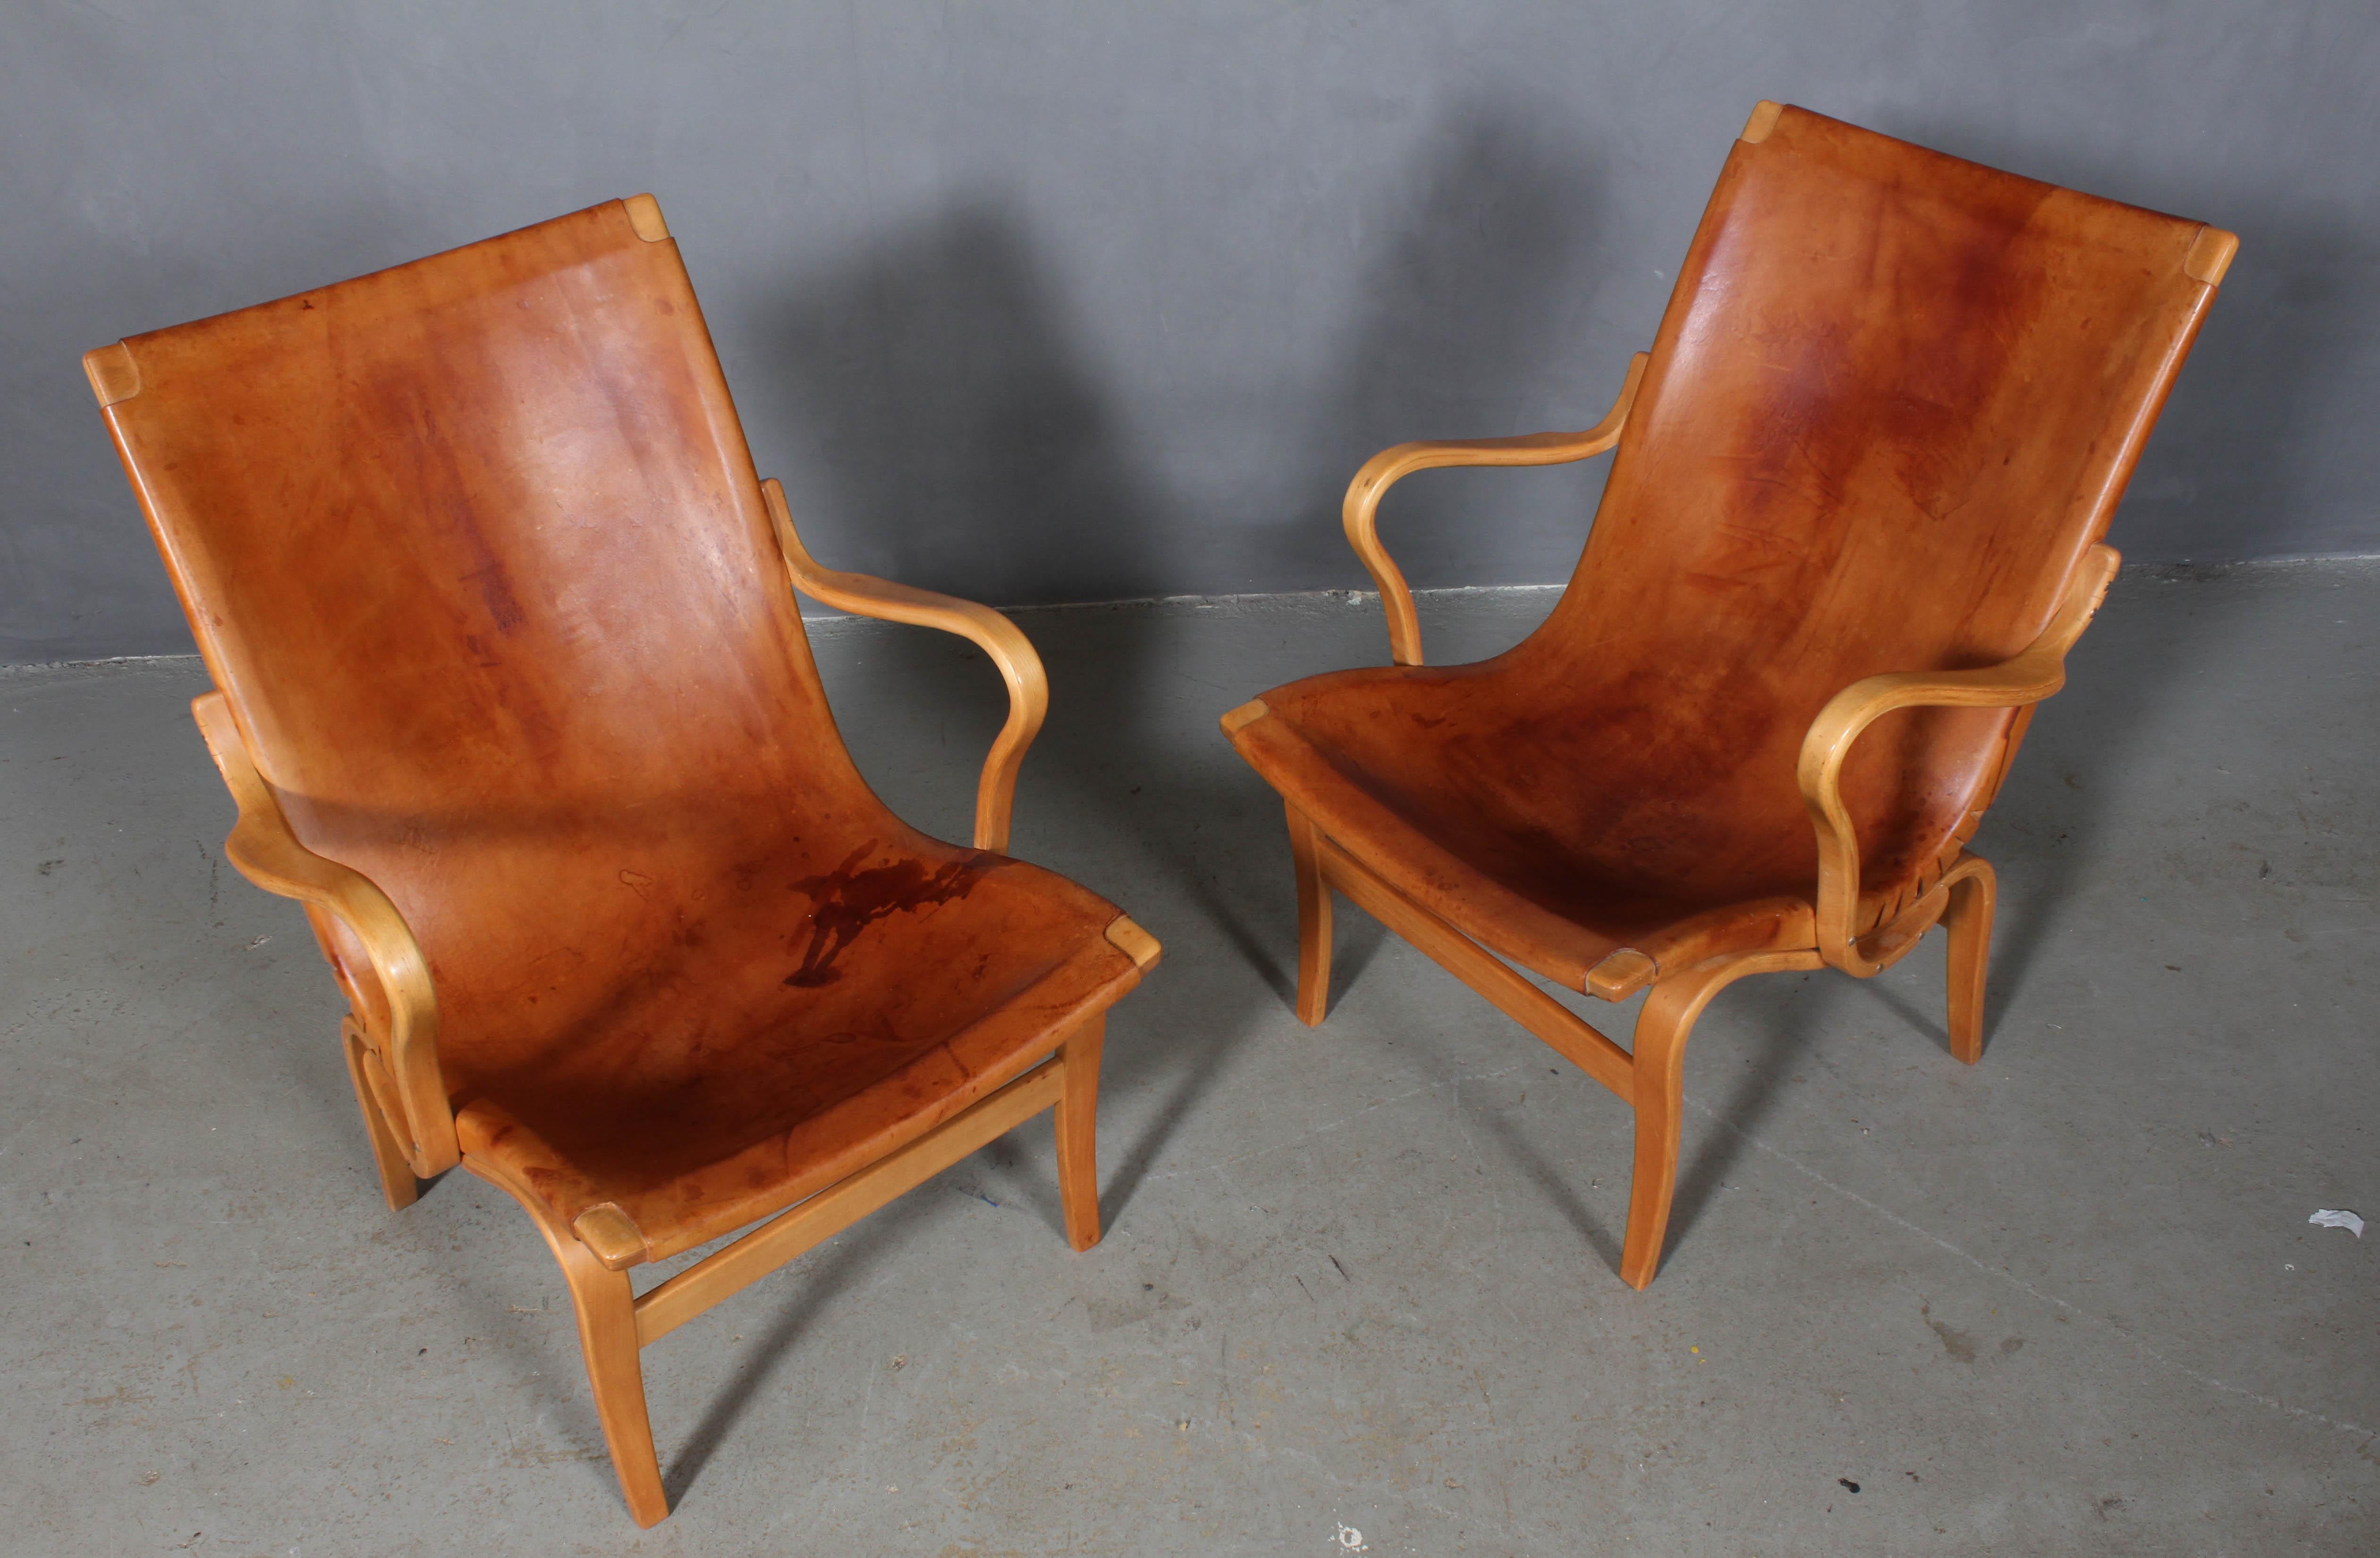 Bruno Mathsson pair of Eva lounge chair with patinated saddle leather

Frame in beech.

Made by Karl Mathsson.